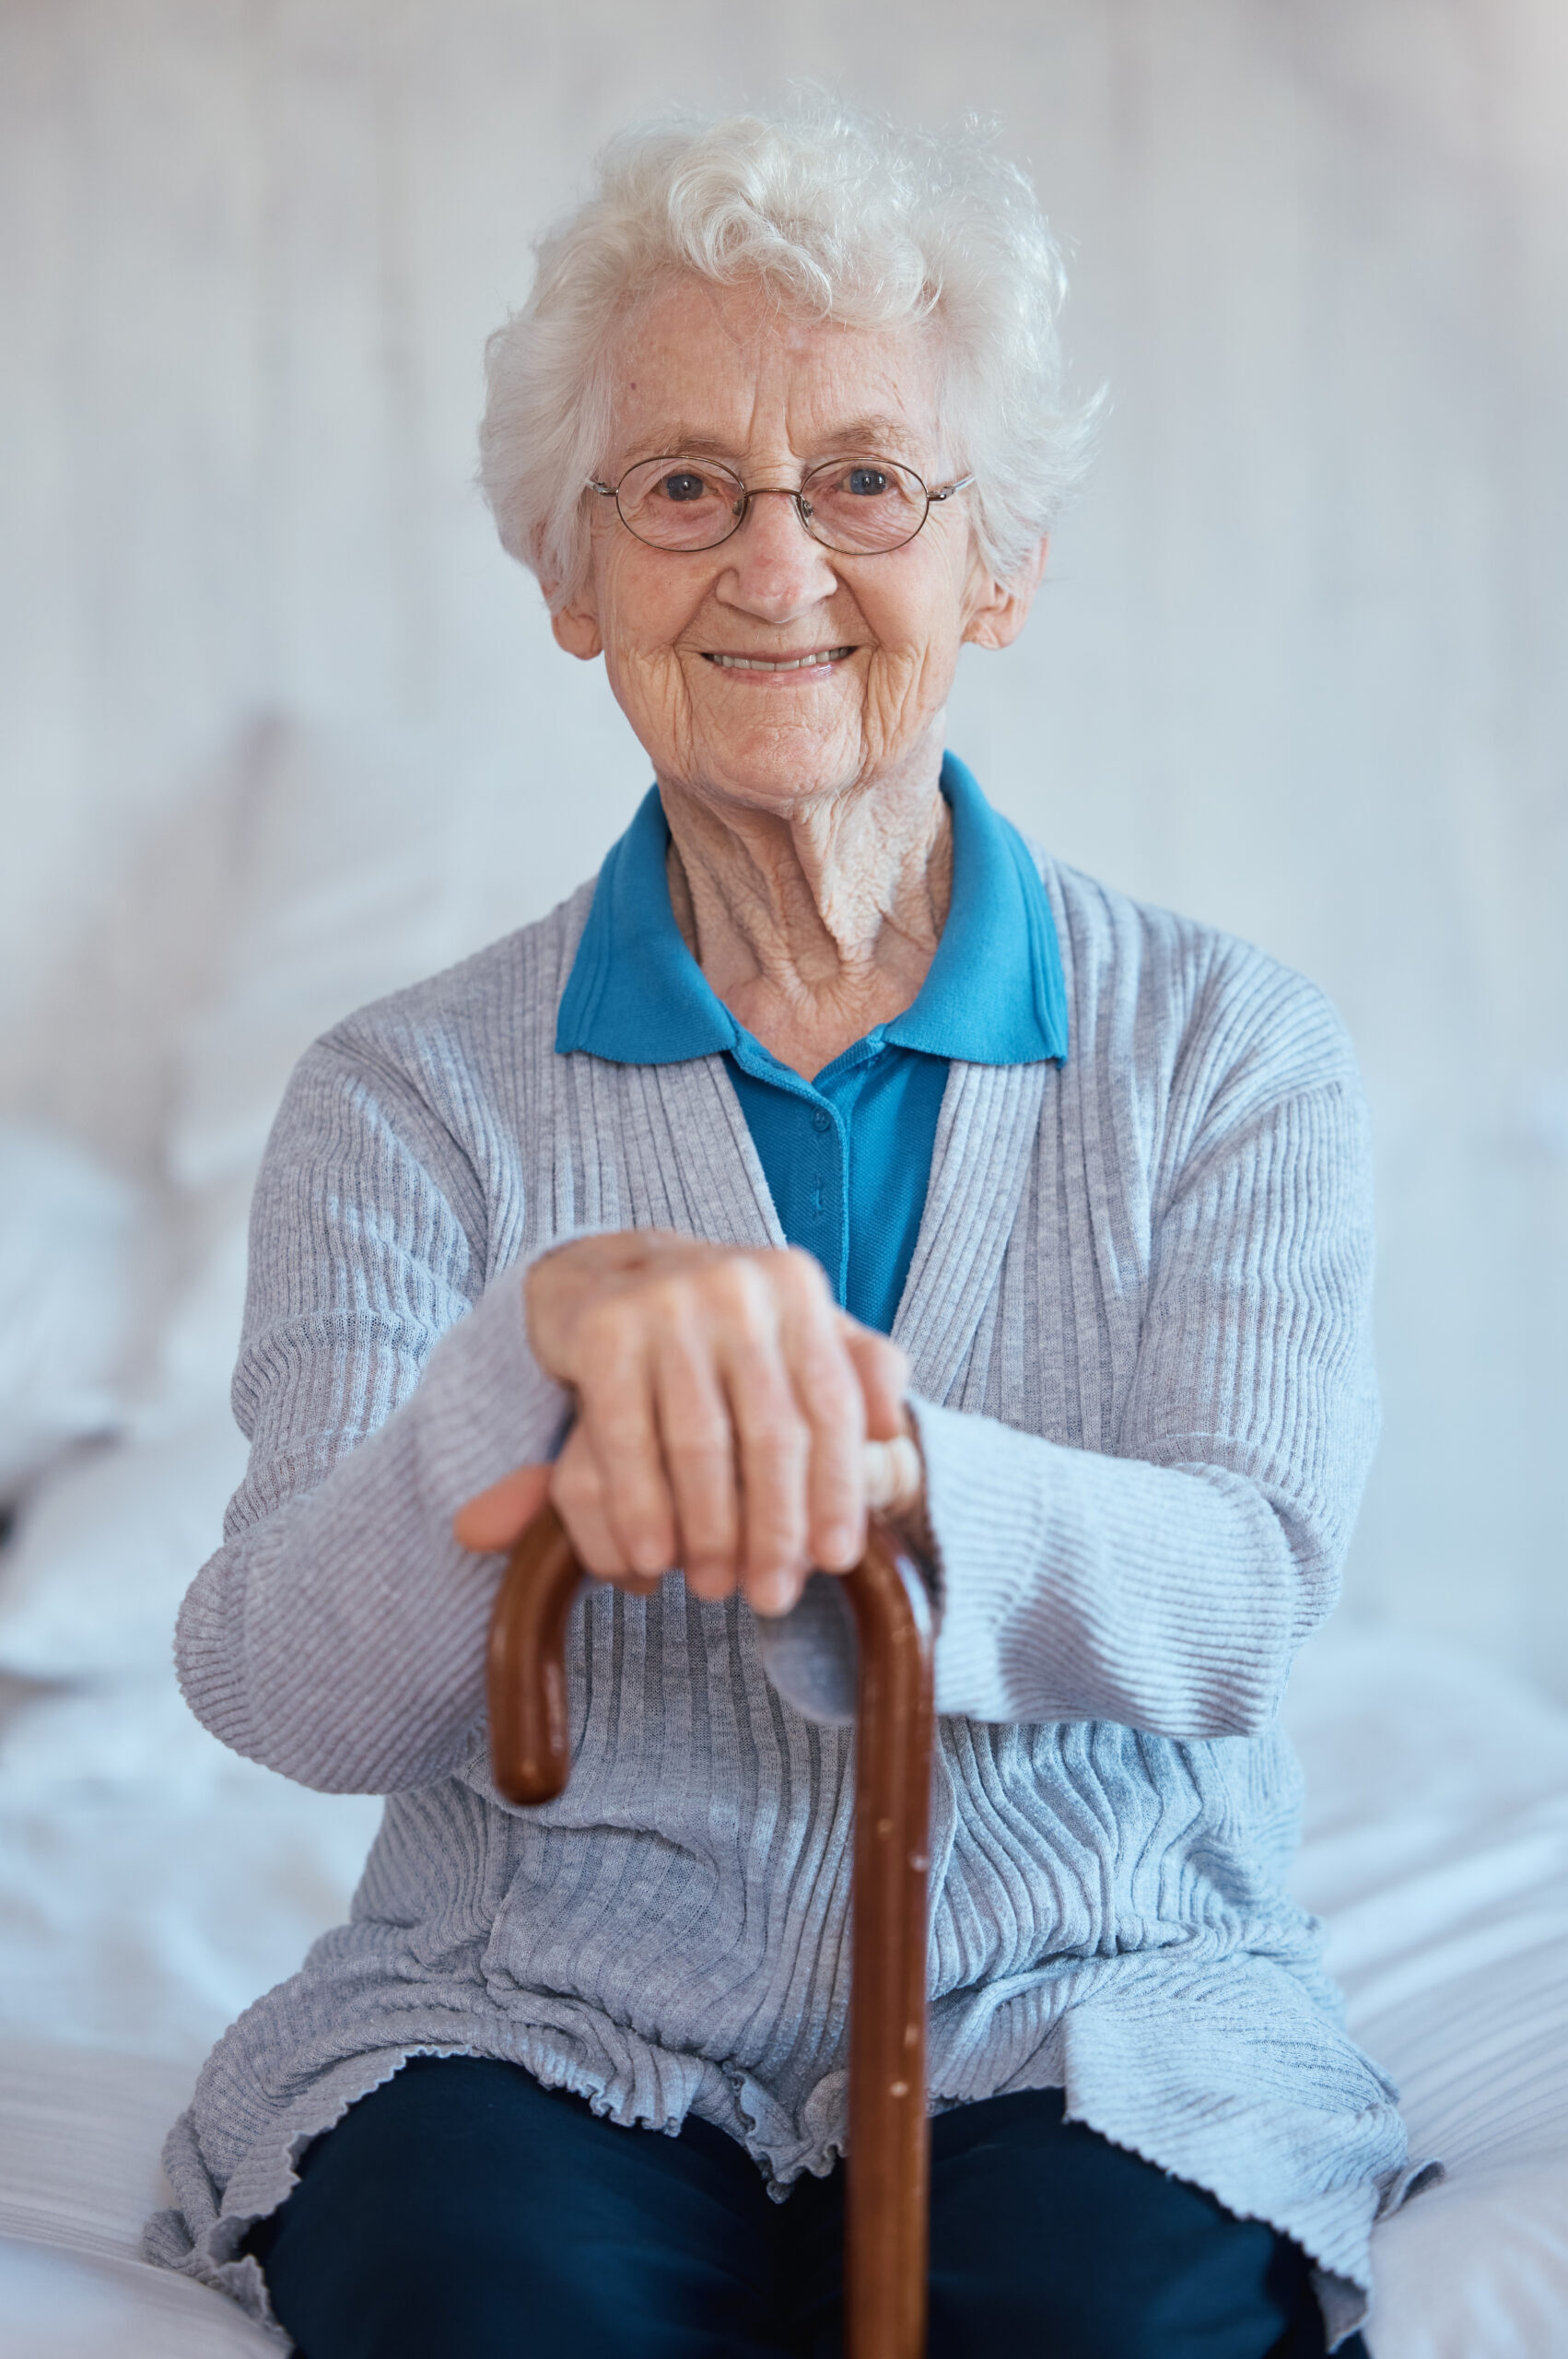 Elderly woman, sitting portrait and smile on bed with happiness, walking stick and relax in nursing home. Happy senior lady, bedroom and cane for support, healthcare and wellness in retirement house